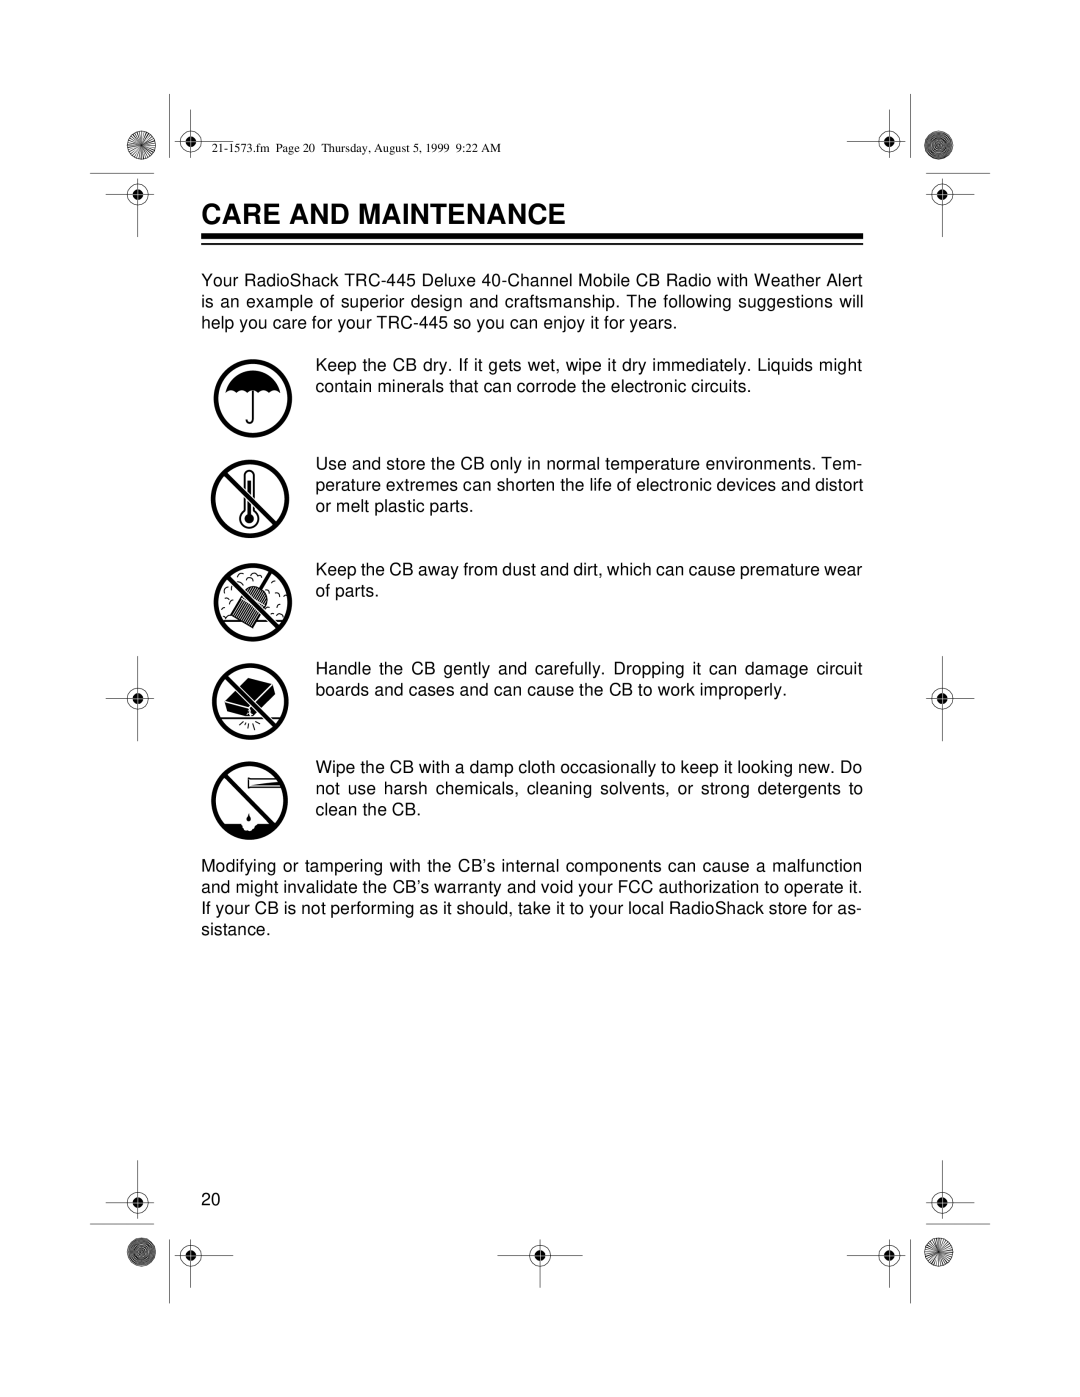 Samsung TRC-445 owner manual Care And Maintenance 